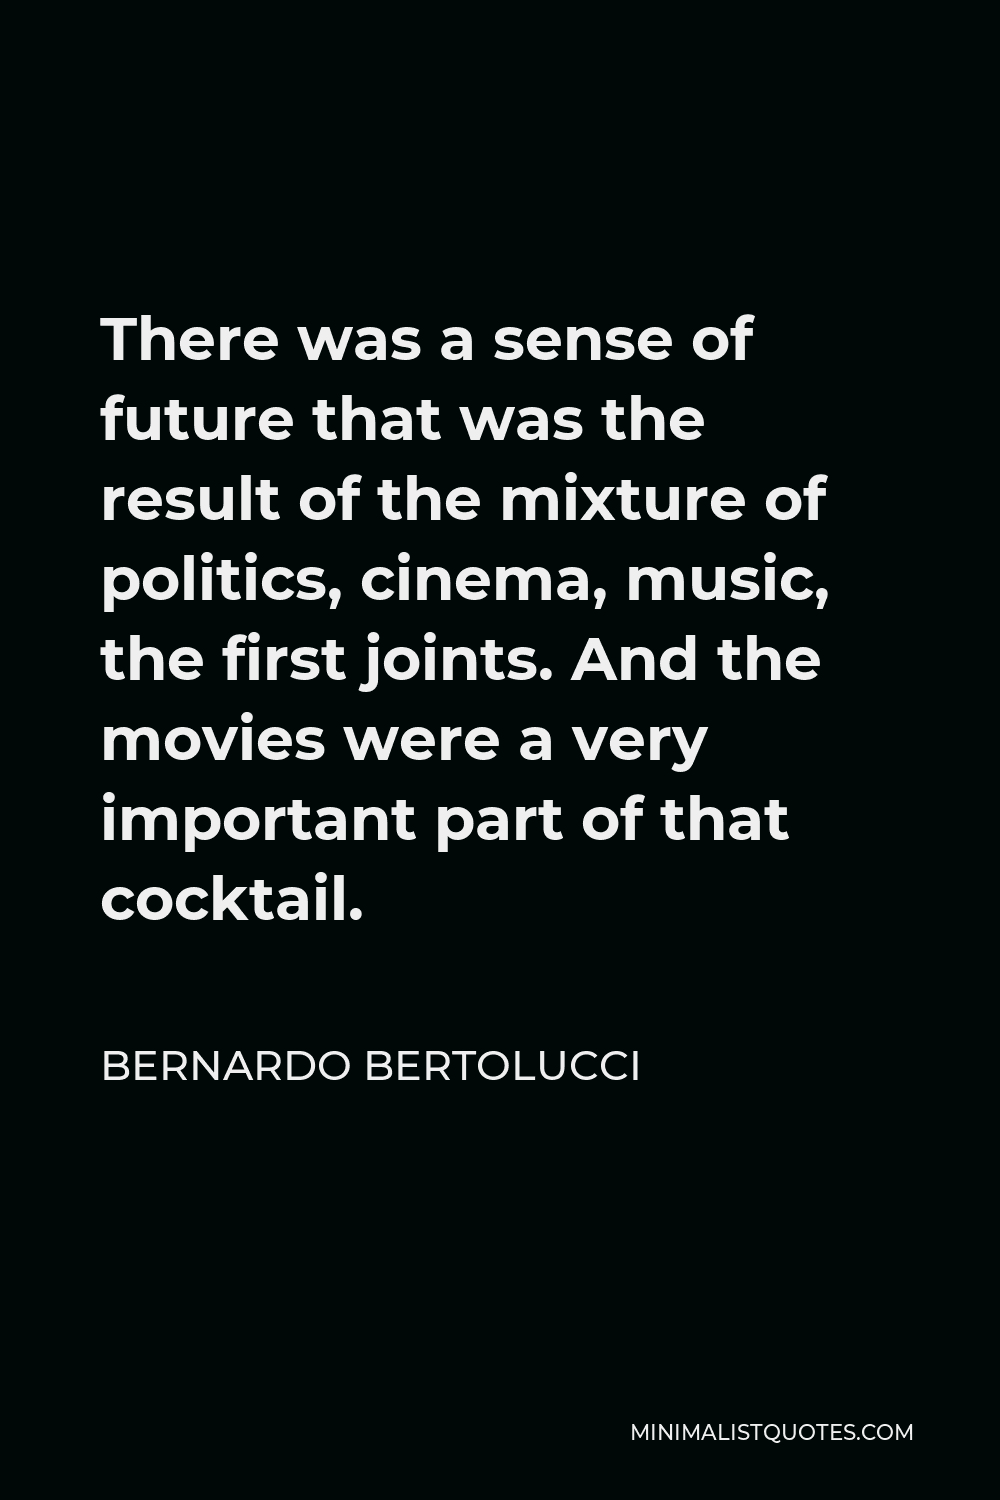 Bernardo Bertolucci Quote - There was a sense of future that was the result of the mixture of politics, cinema, music, the first joints. And the movies were a very important part of that cocktail.